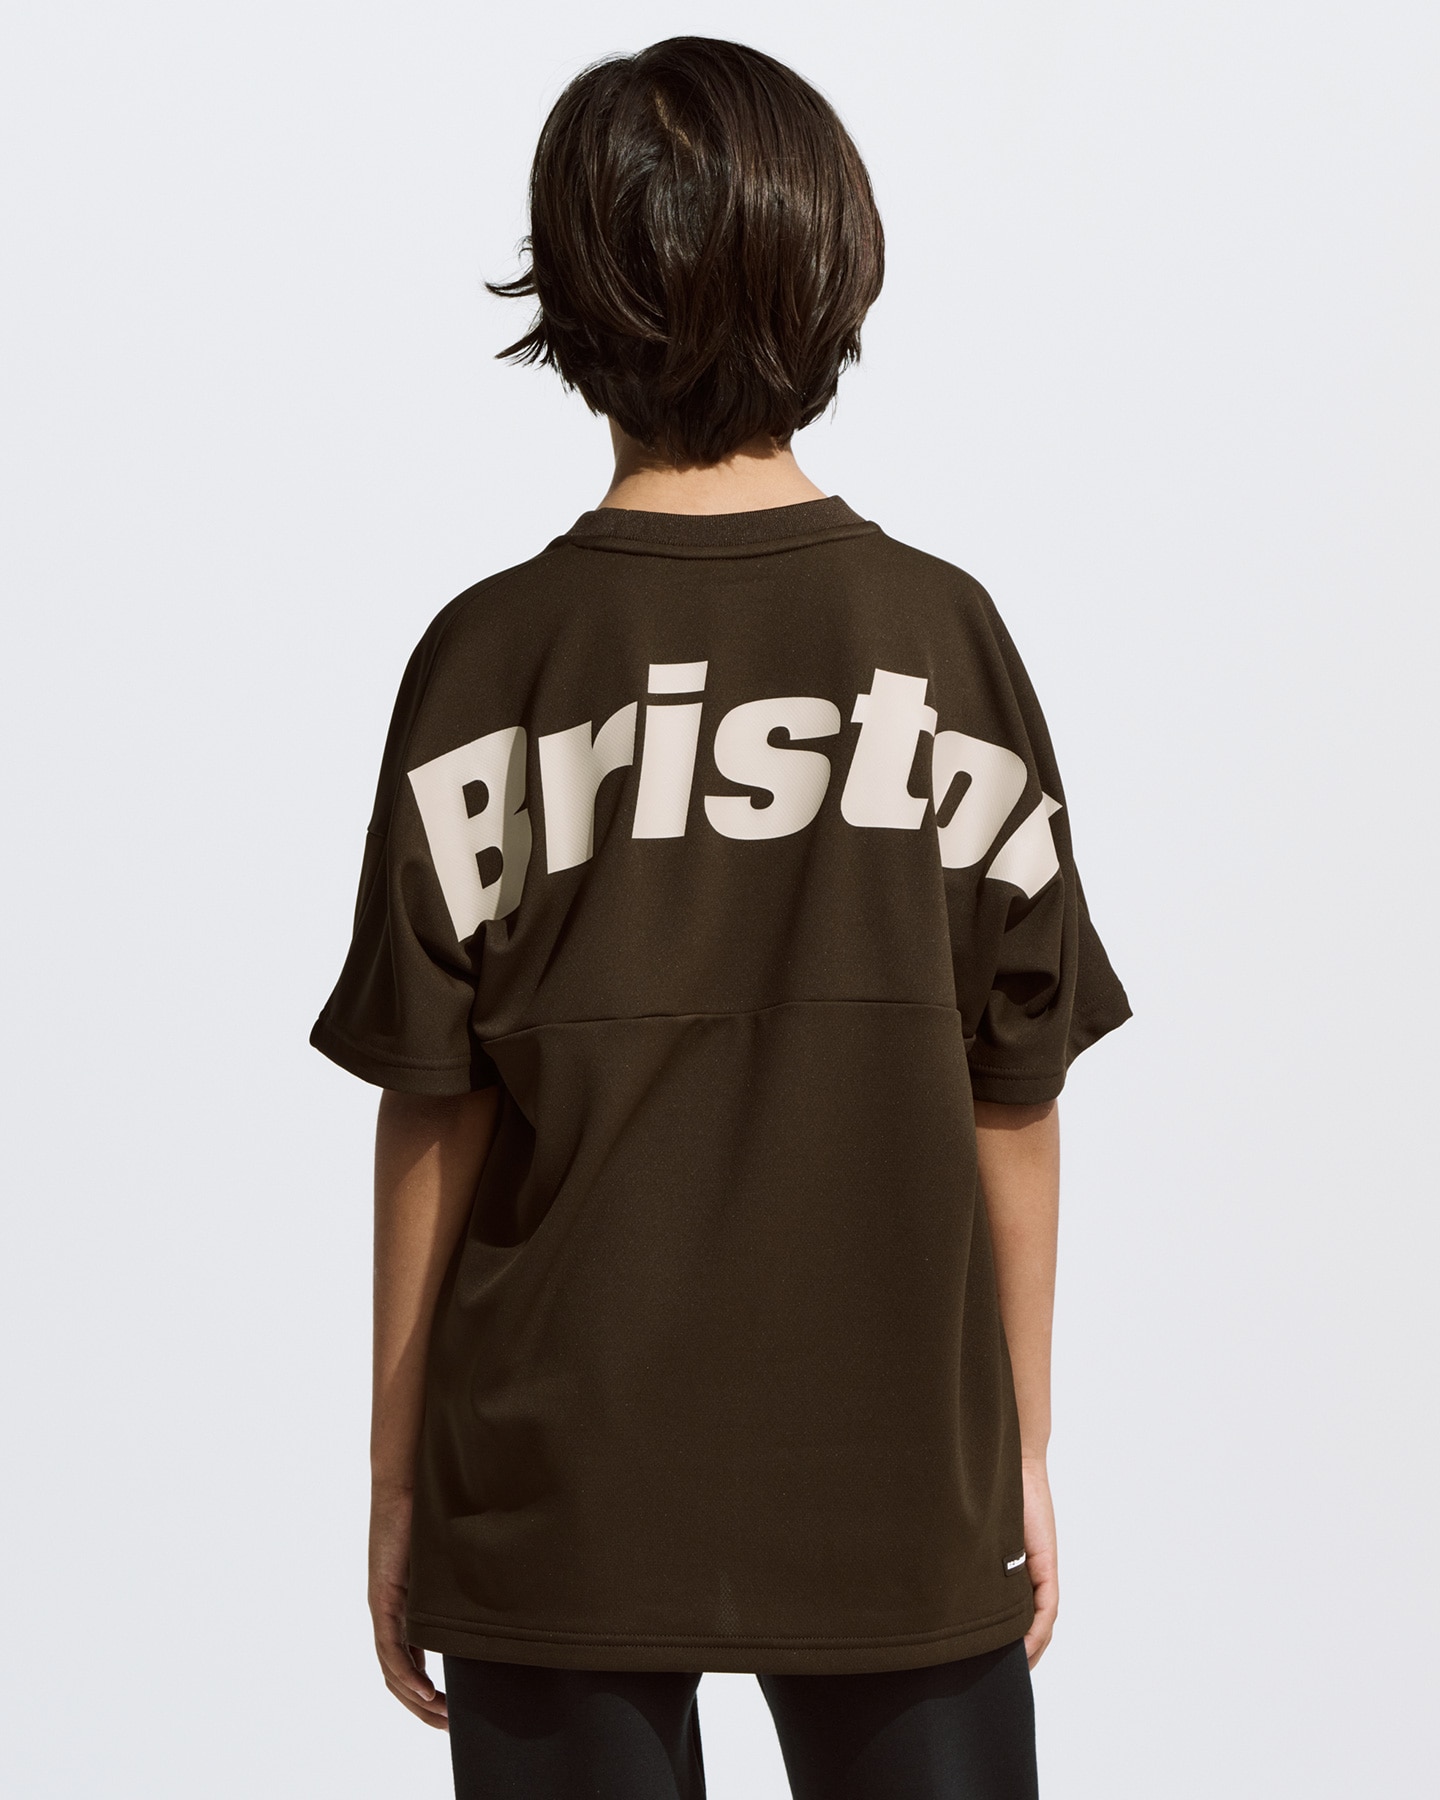 S 送料無料 FCRB 22SS BIG LOGO WIDE TEE WHITE